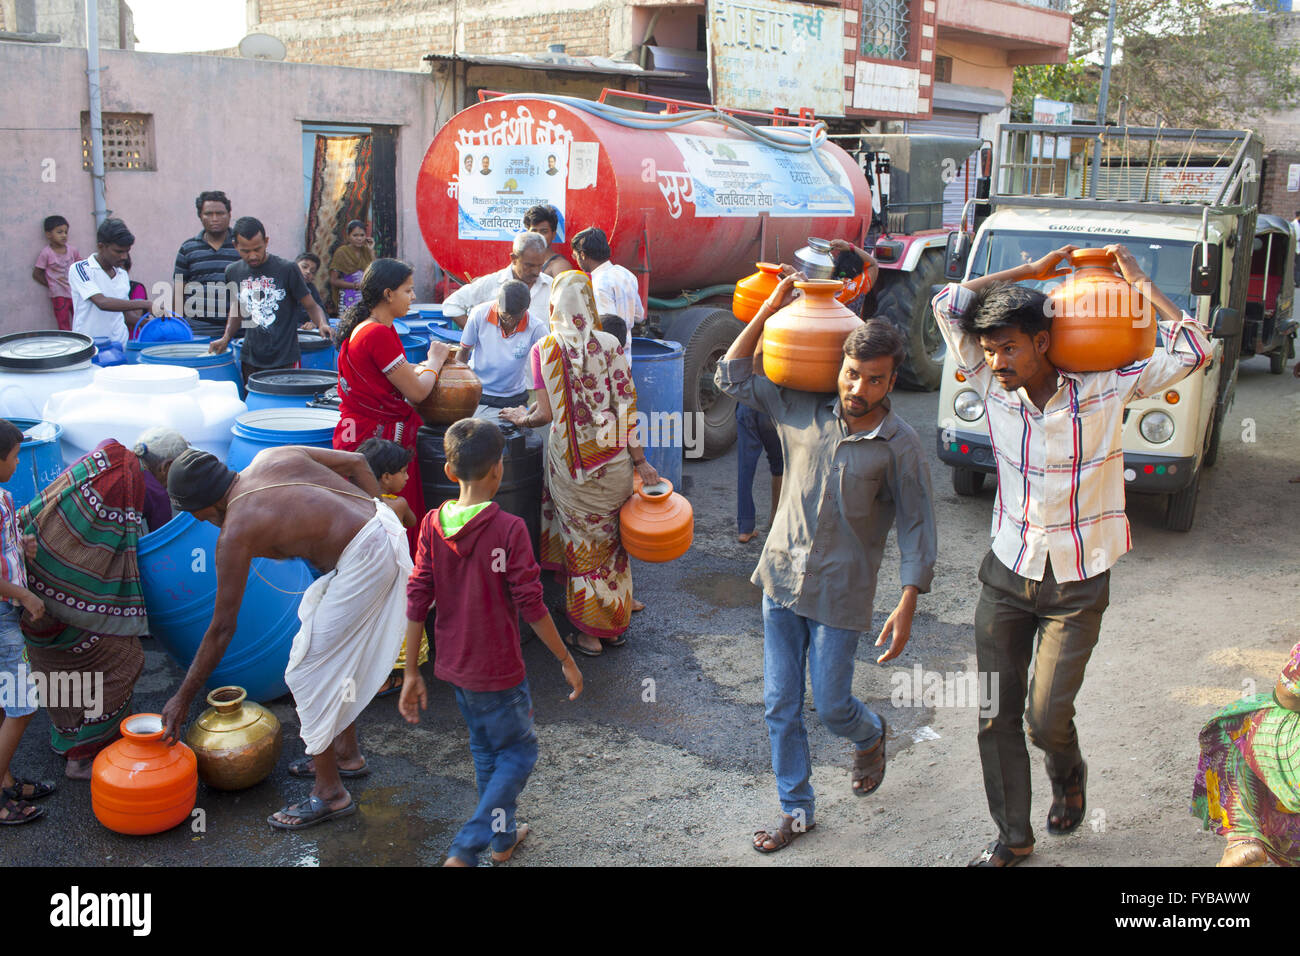 Latur, Maharashtra. 21st Apr, 2016. 21 April 2016 - Latur - INDIA.Citizens collect water from a water tanker in Latur. © Subhash Sharma/ZUMA Wire/Alamy Live News Stock Photo